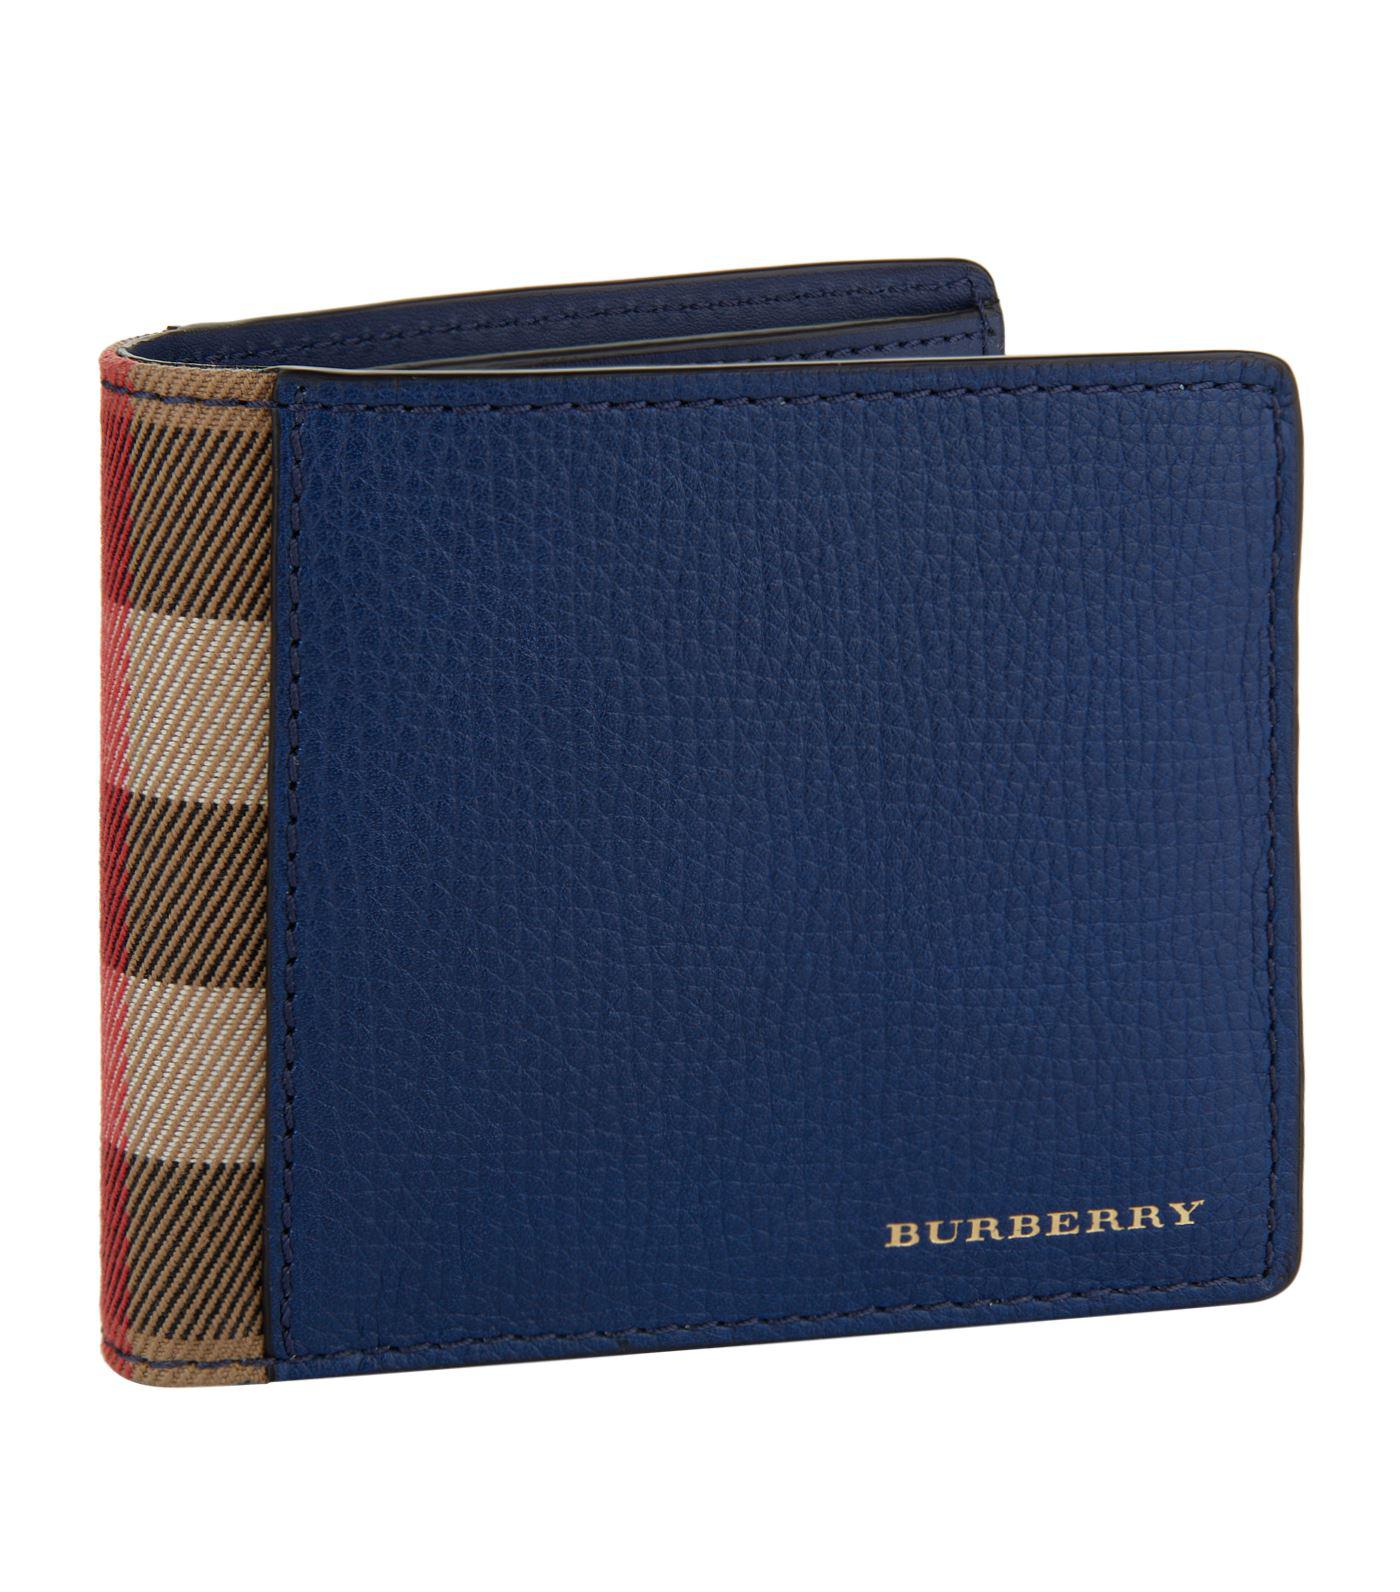 Mens Accessories Wallets and cardholders Burberry Leather London Check Bifold Wallet in Blue for Men 